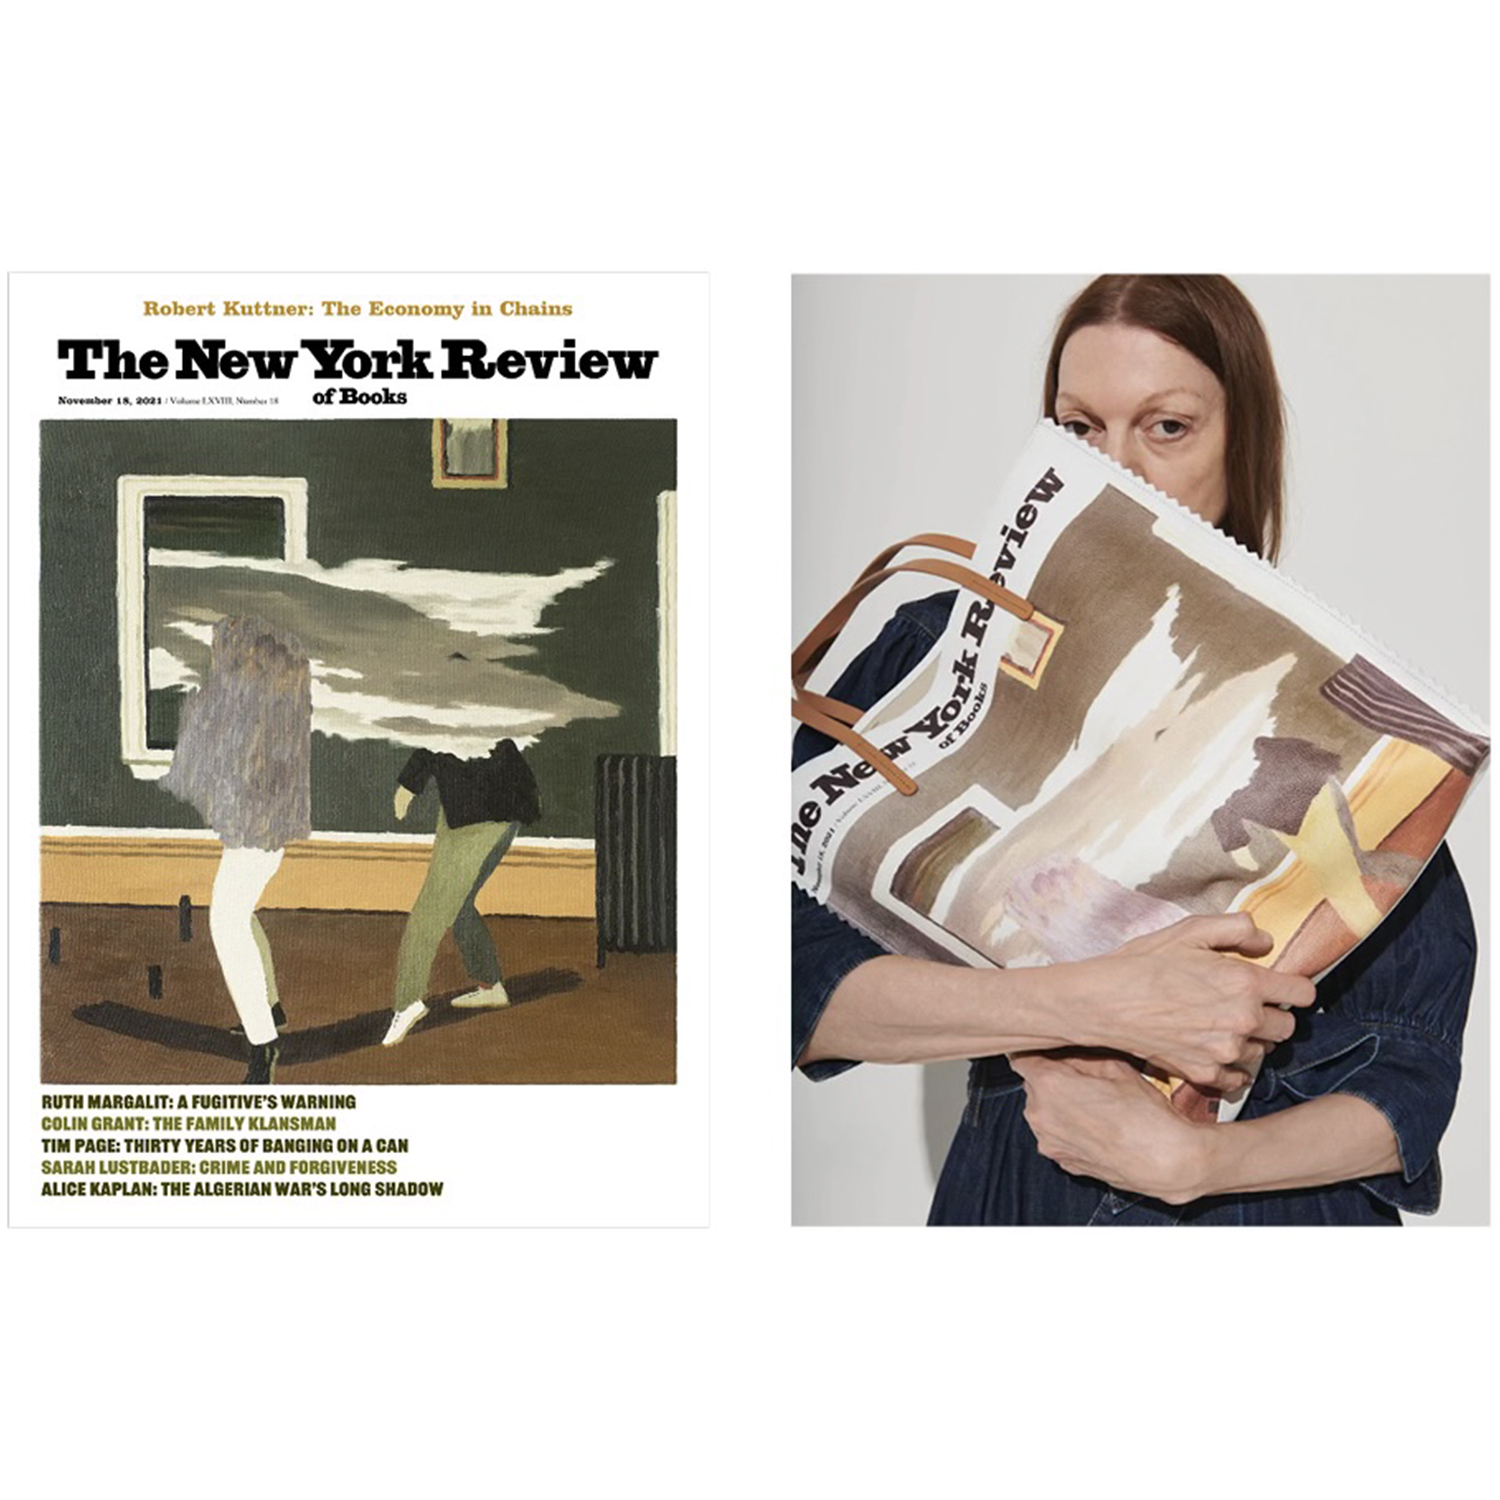 NY Review Cover and Rachel Comey Bag